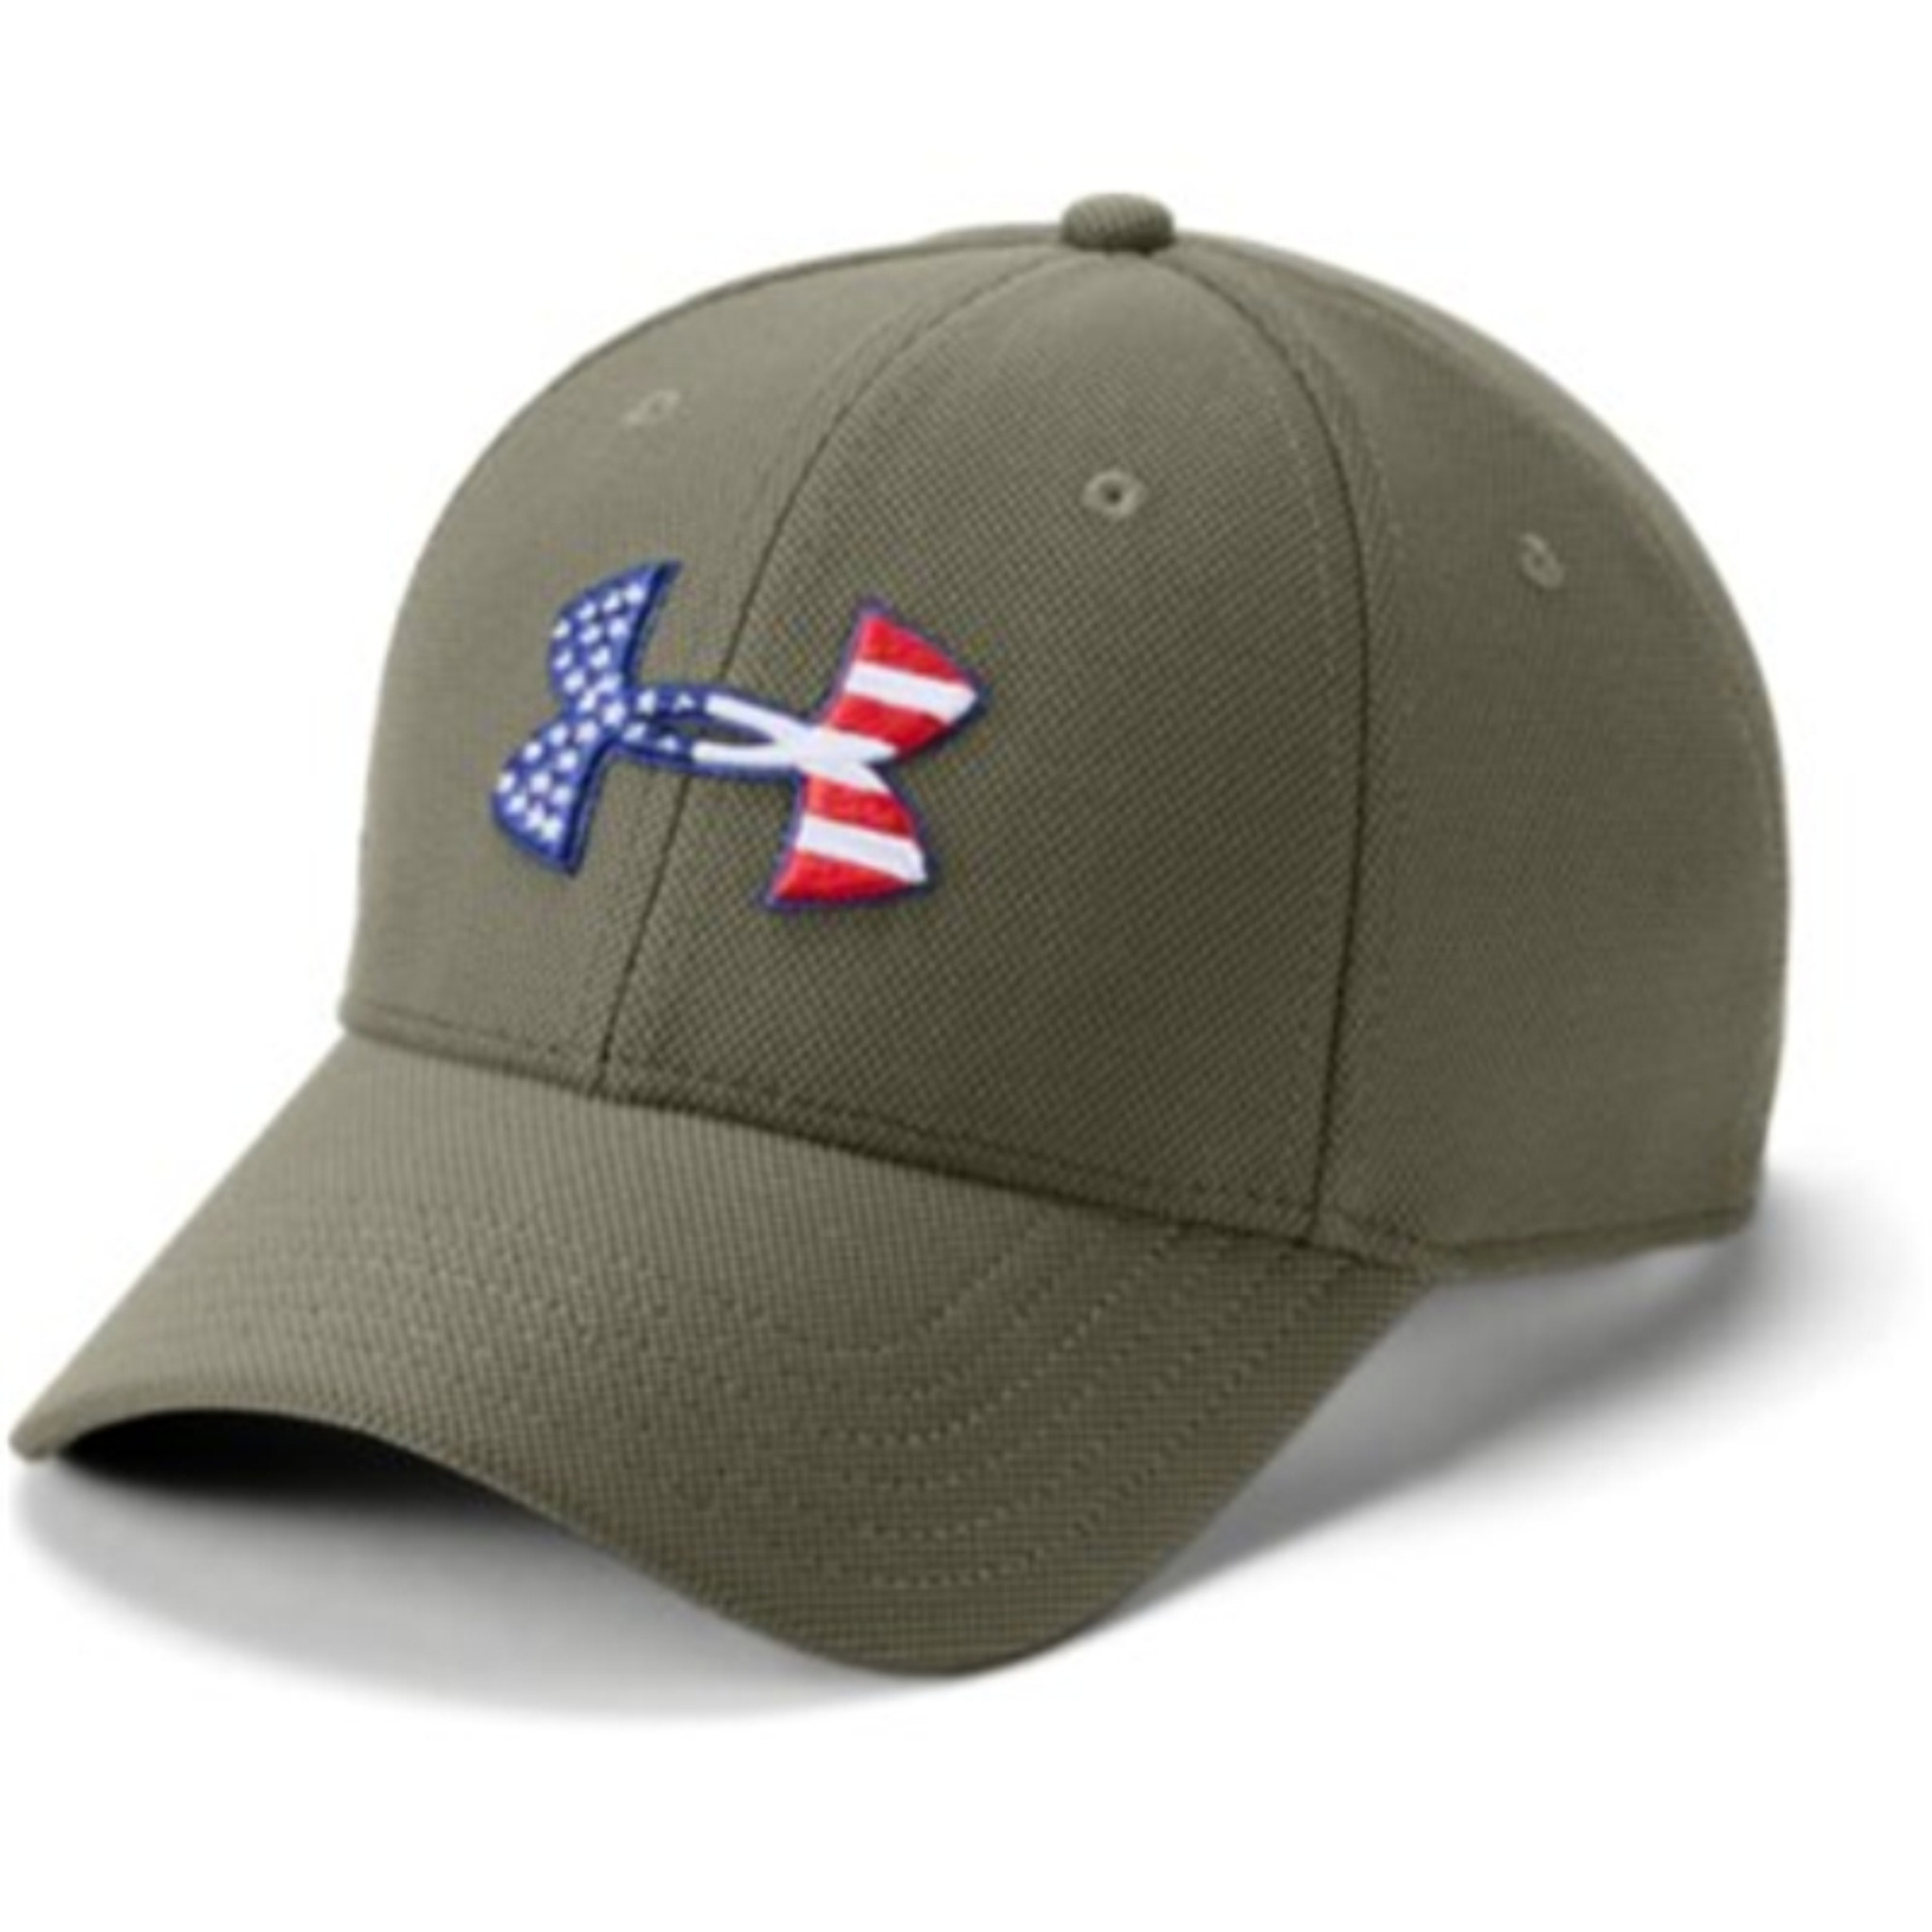 od green under armour hat